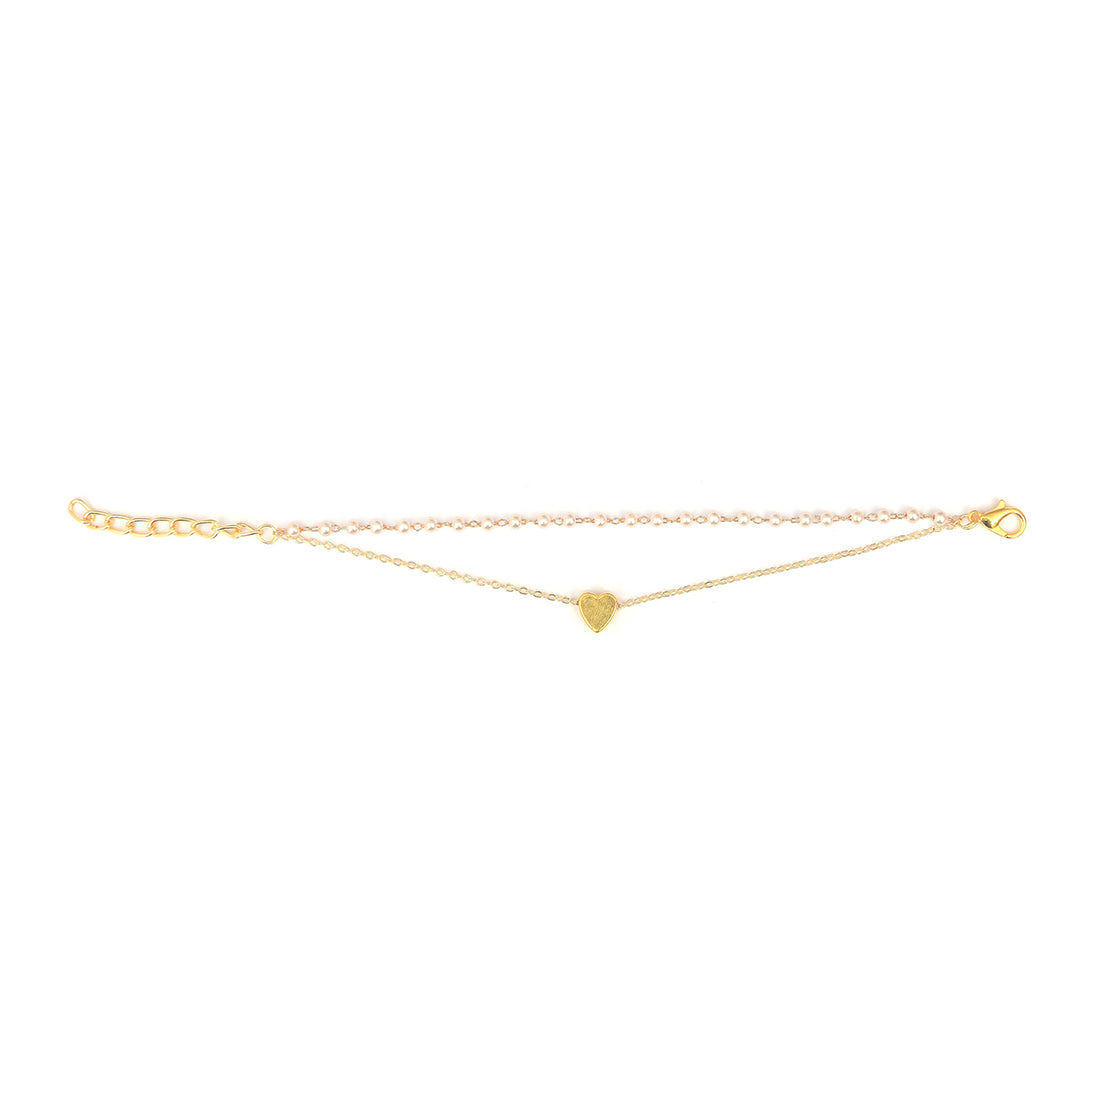 Two-Layered Bracelet: Gold-Toned Heart Chain & Seed Pearls Strand